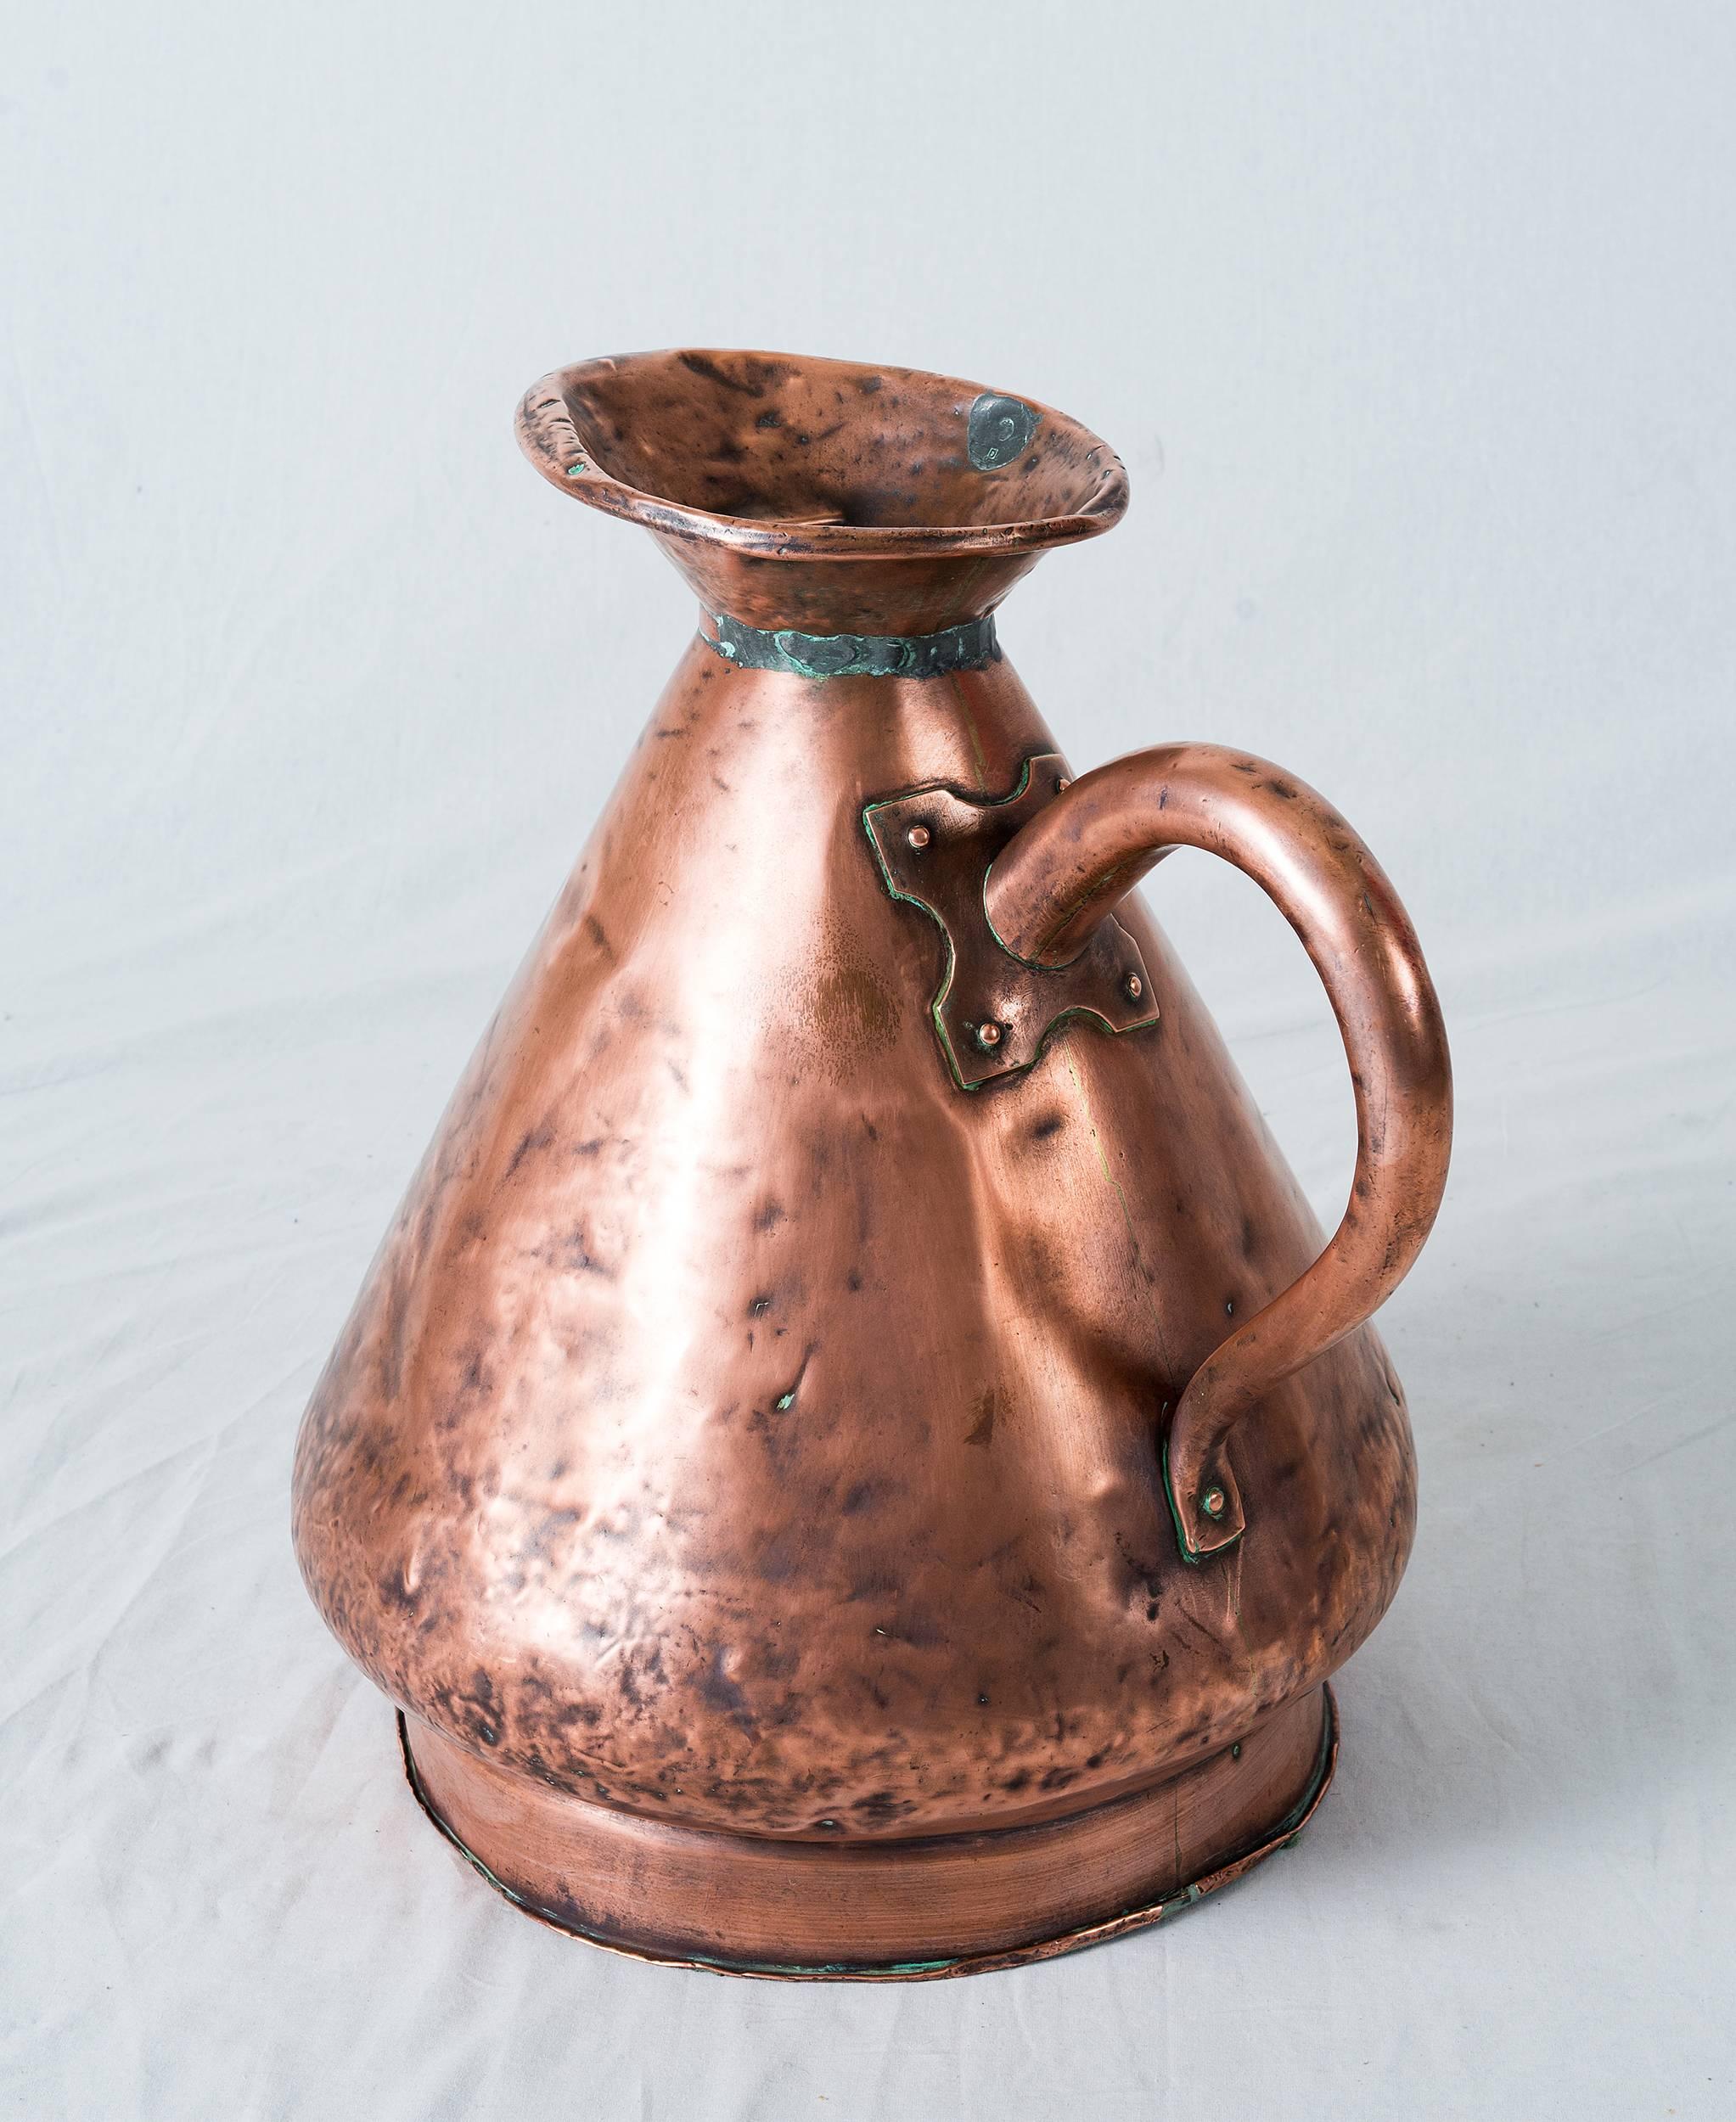 19th Century Large Four Gallon Victorian English Copper Ale-Beer Measuring Jug